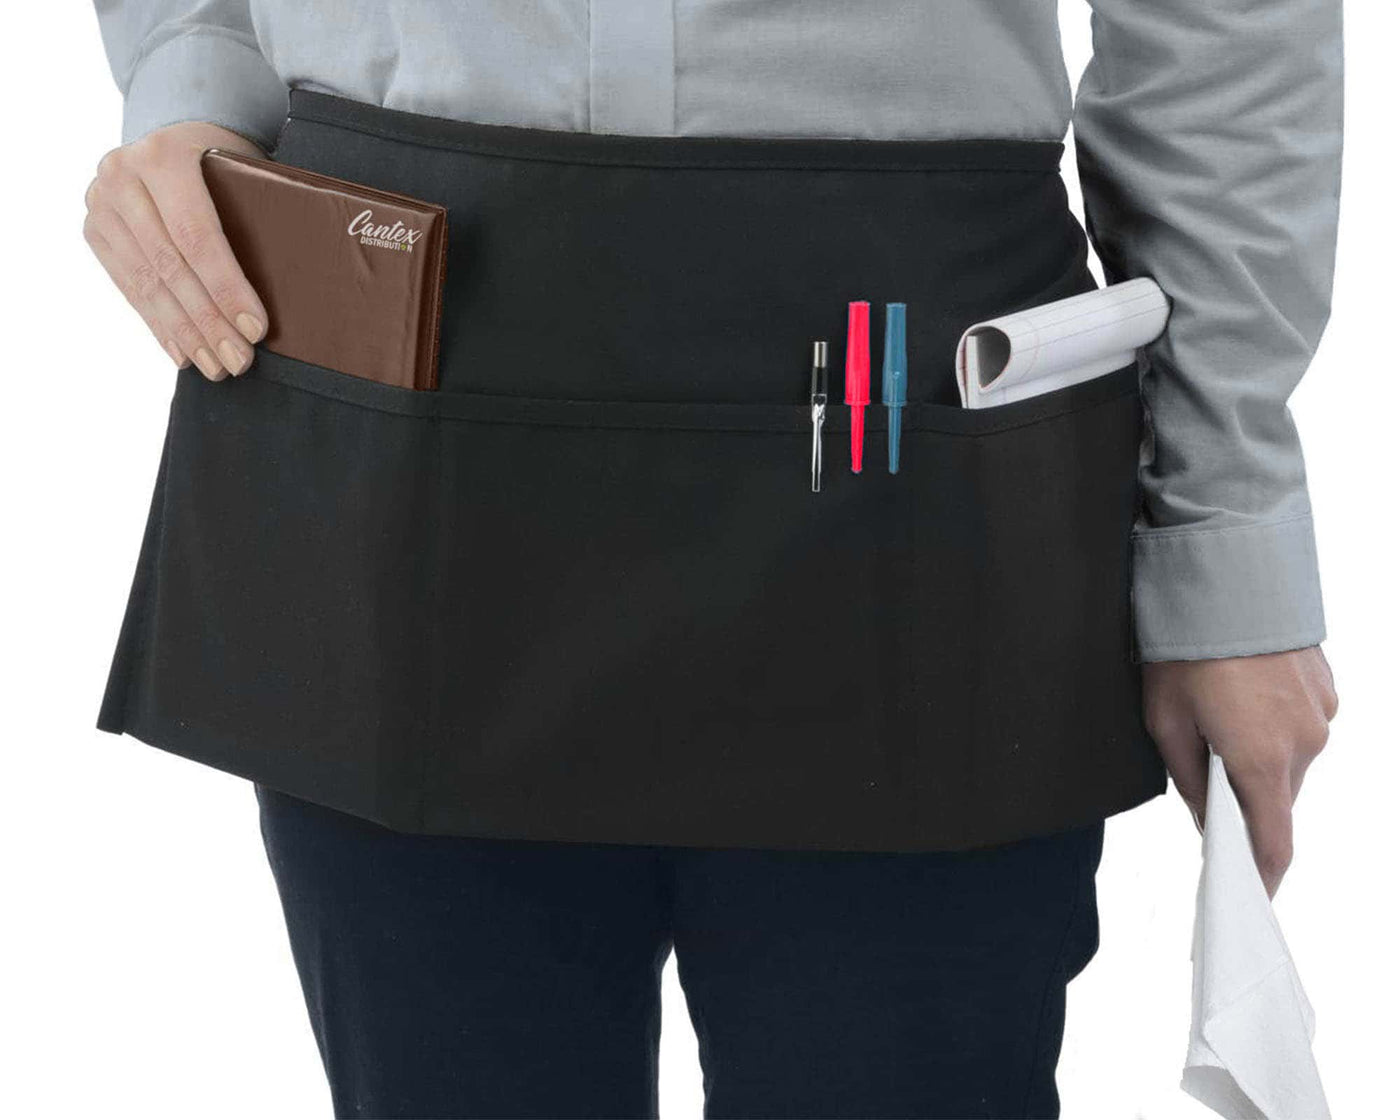 Server apron with three large pockets for notepad, pens, and phone. Server Coin apron with adjustable waistband. 